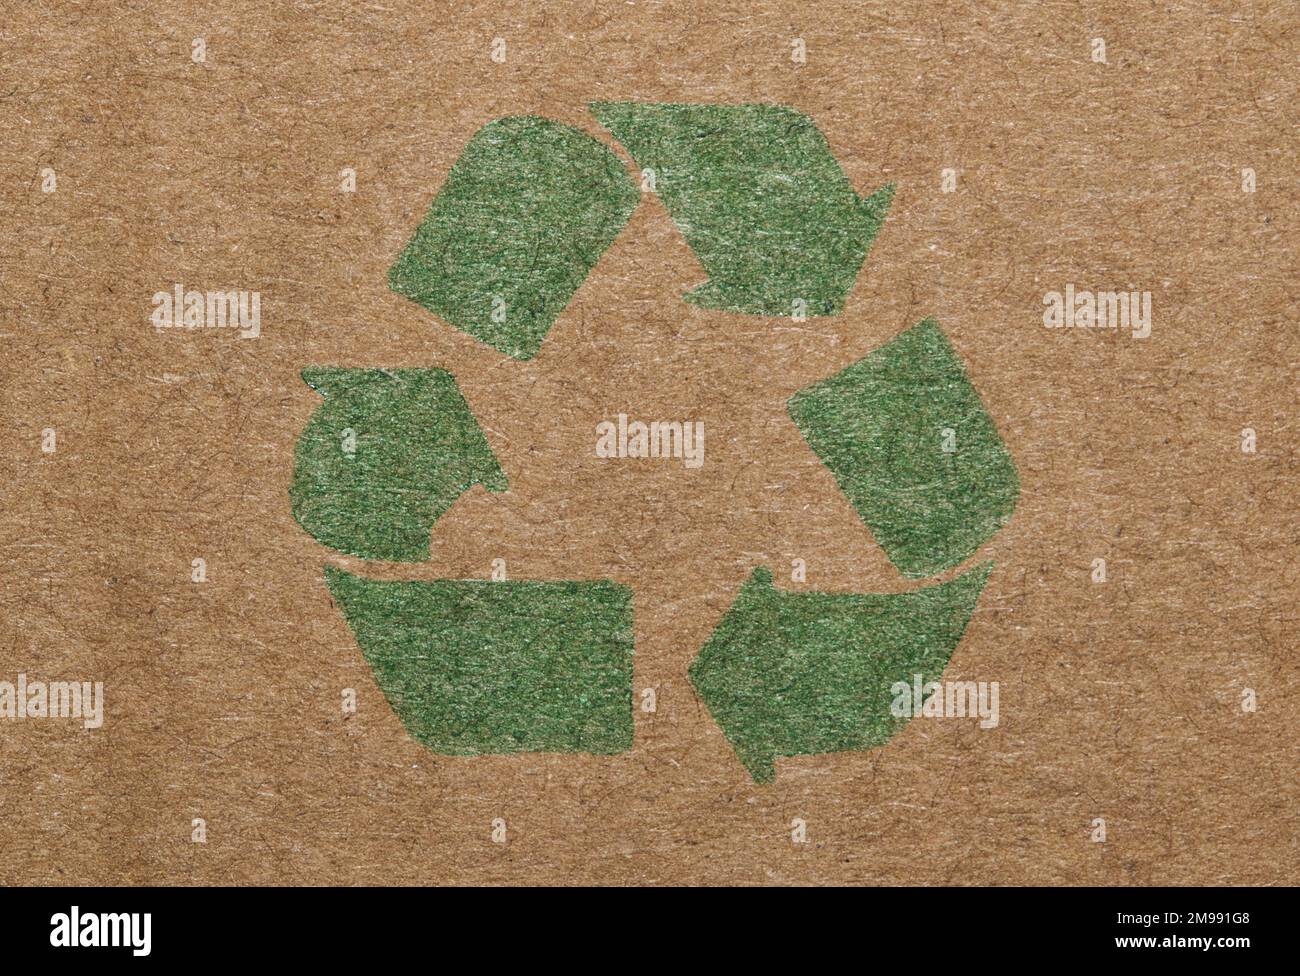 Green recycle symbol printed on a cardboard box, closeup isolated macro view. Stock Photo